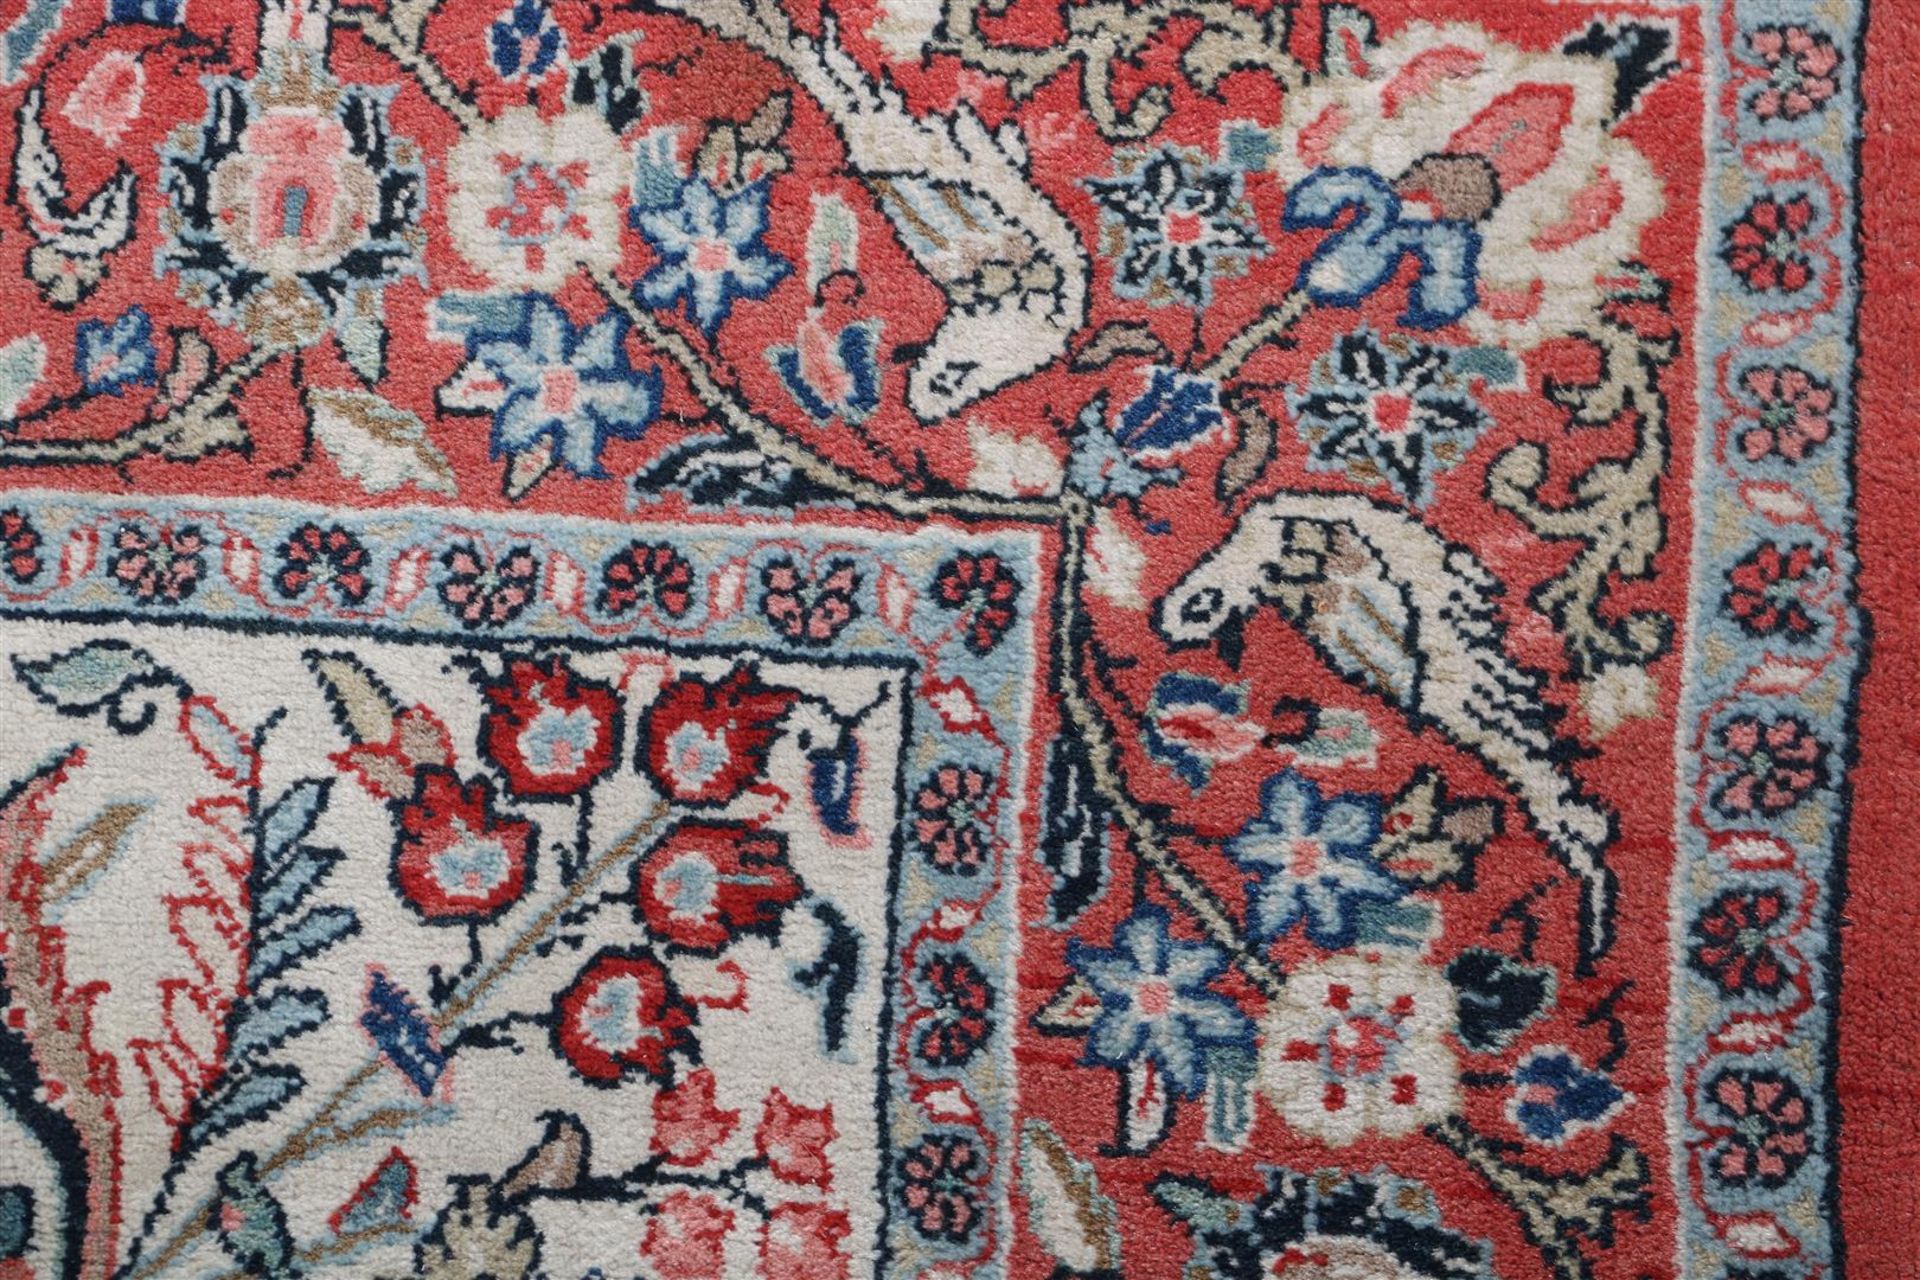 Hand-knotted Ispahan carpet - Image 4 of 5